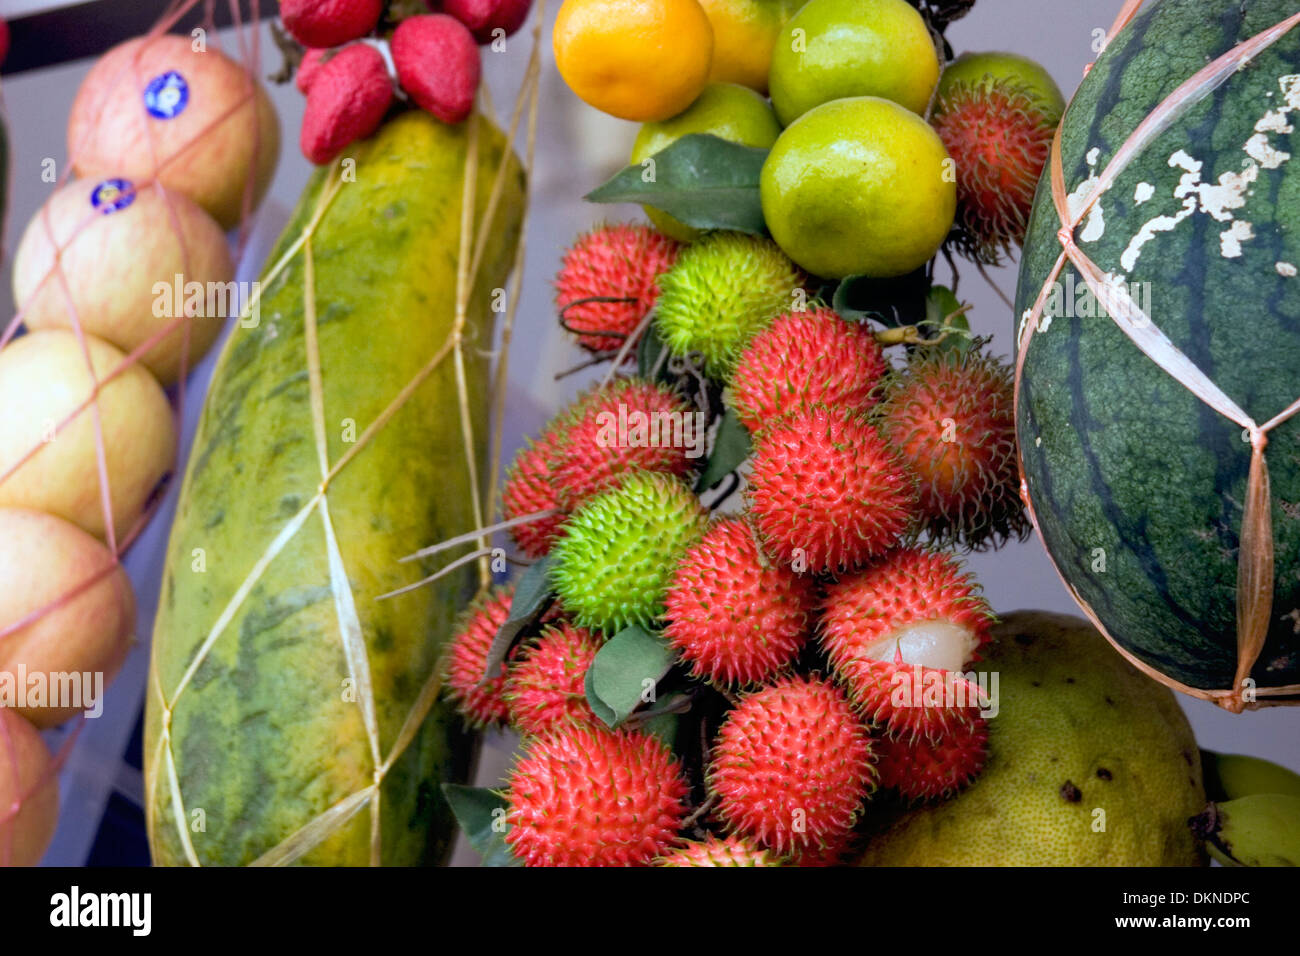 Fruit, including rambutan (center) and watermelon (right) is for sale at a food market in Battambang, Cambodia. Stock Photo